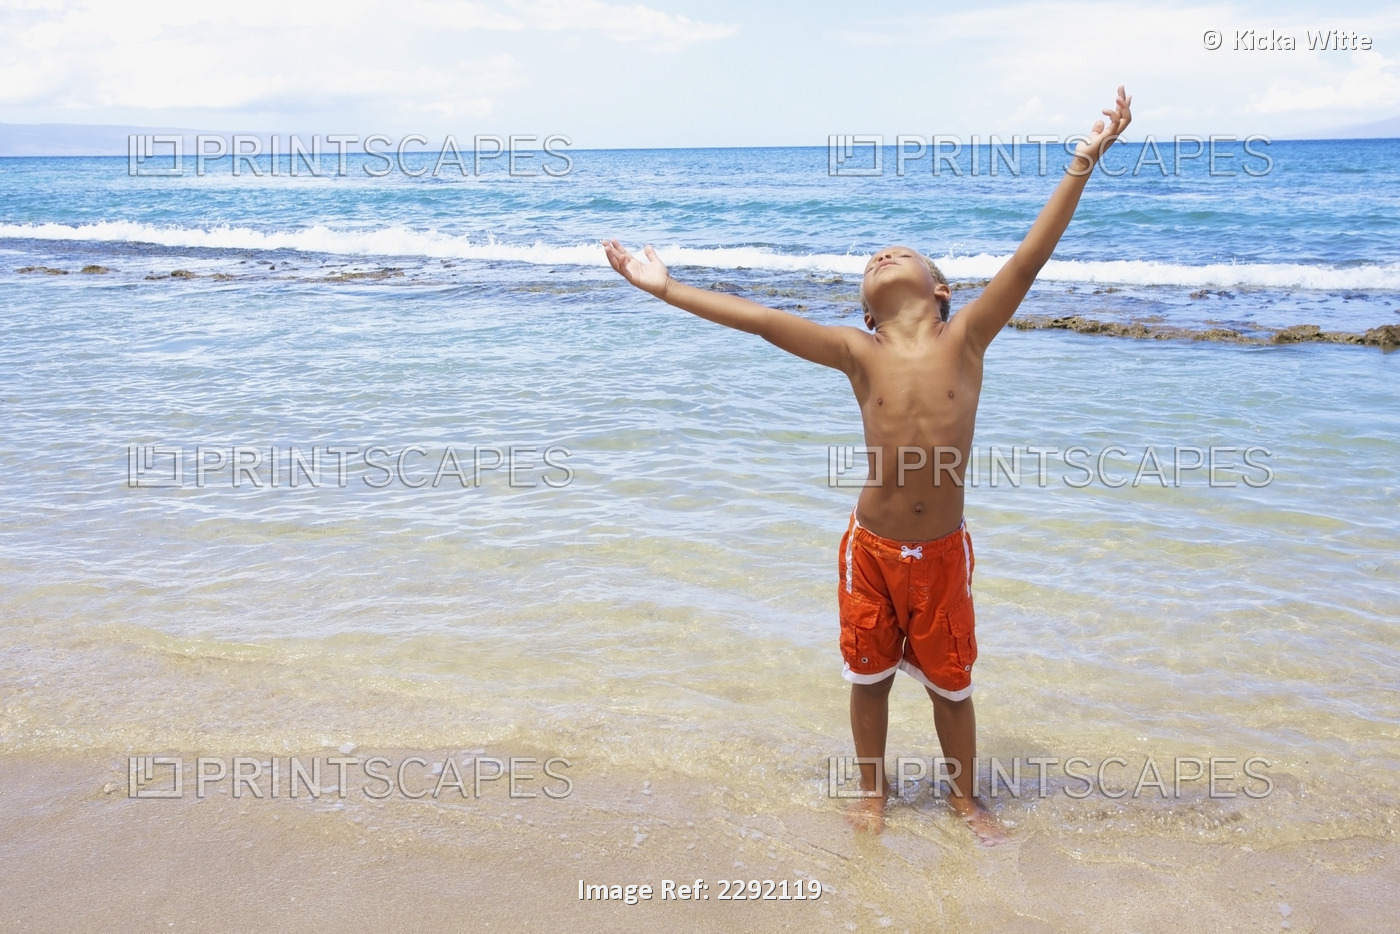 A young boy standing in the shallow water of the ocean with arms raised and ...